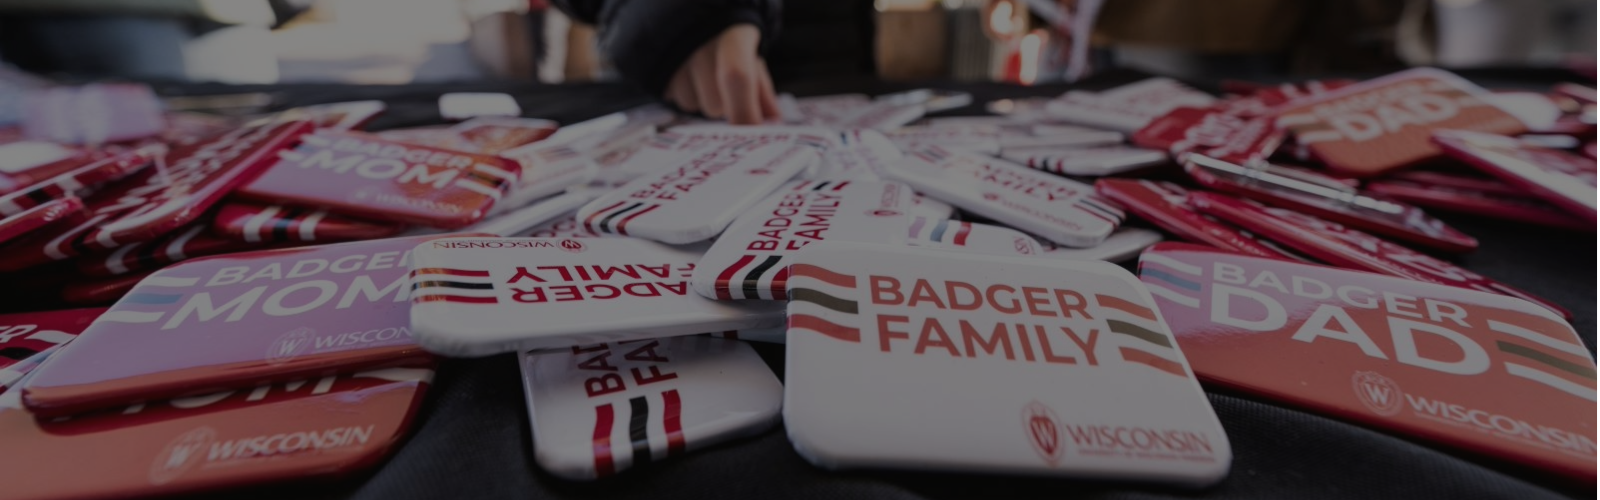 Pins that say Badger Family, Badger Mom, and Badger Dad on a table